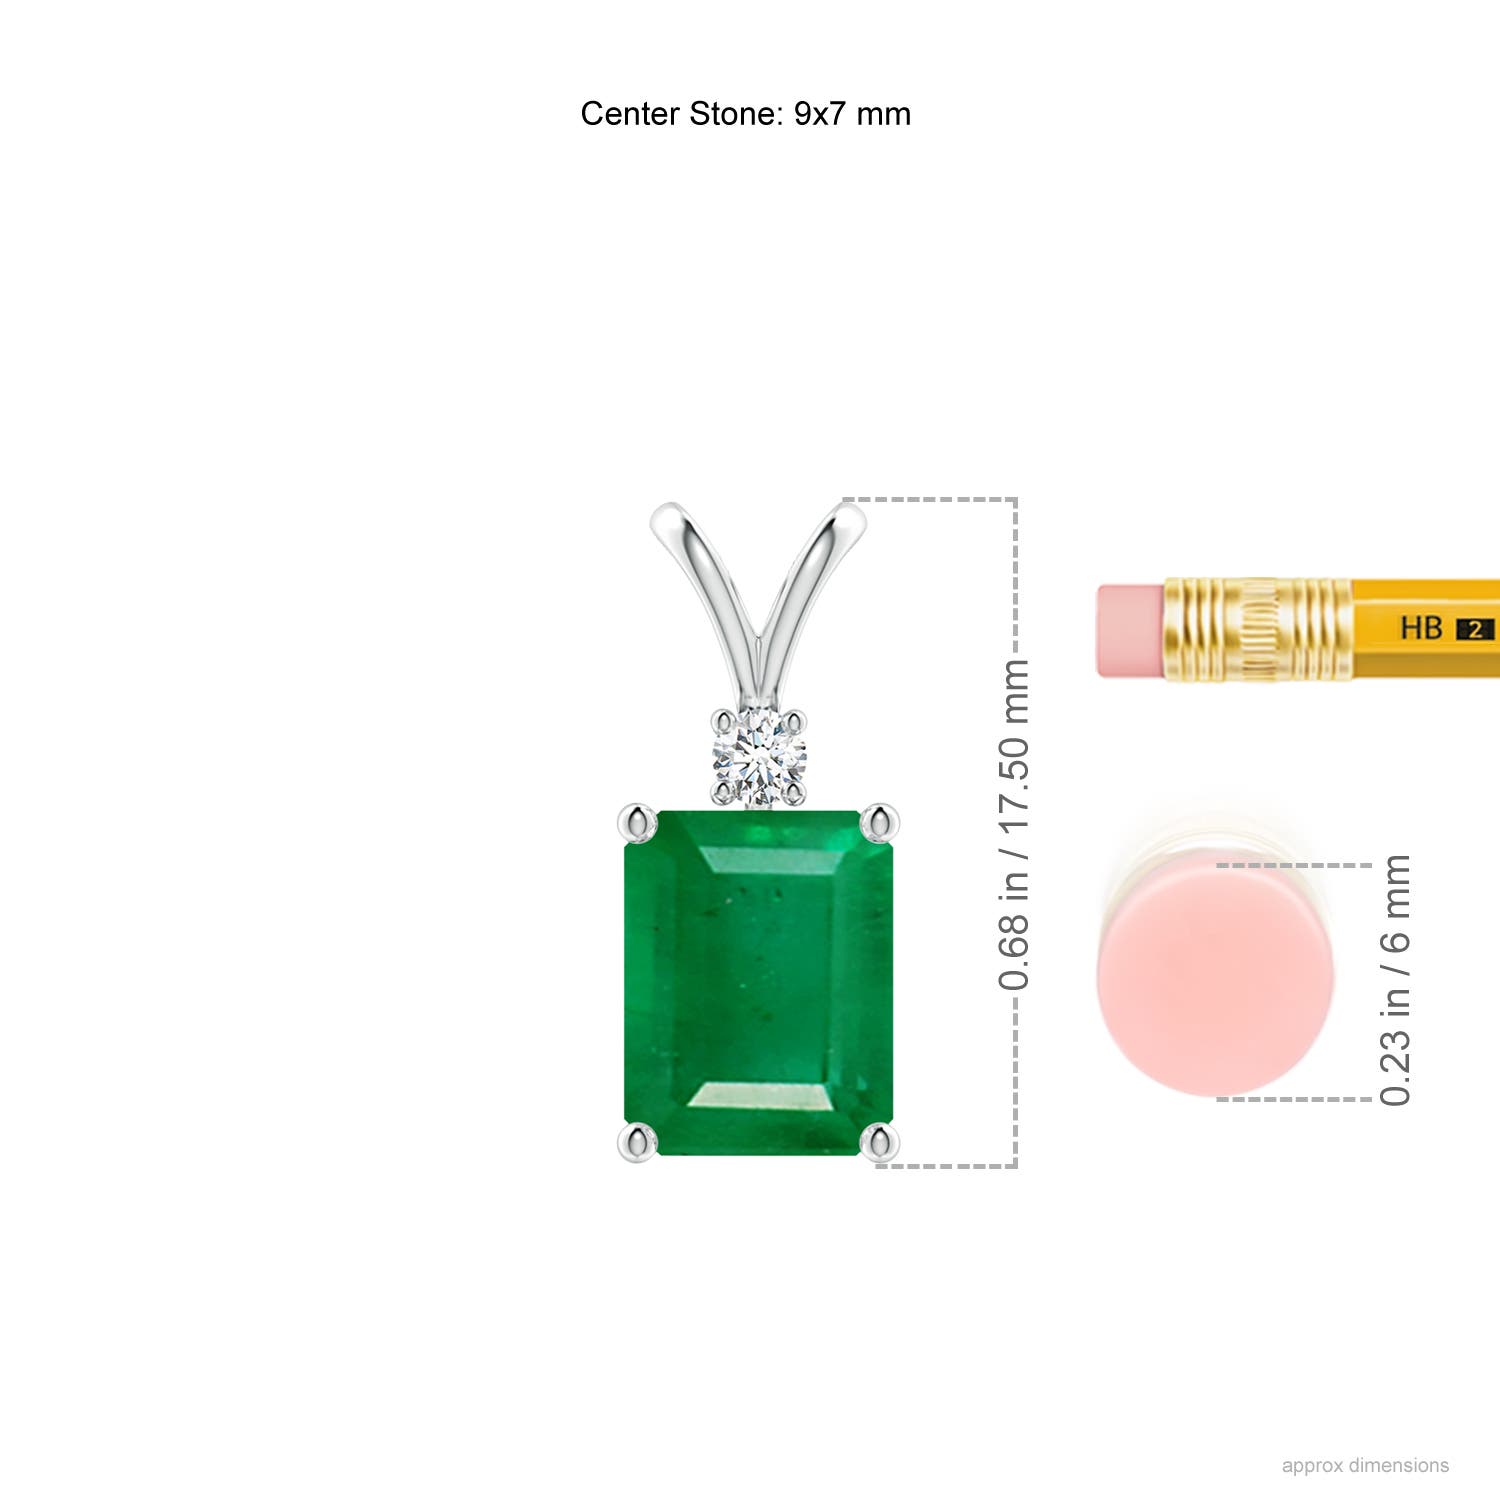 AA - Emerald / 2.32 CT / 14 KT White Gold